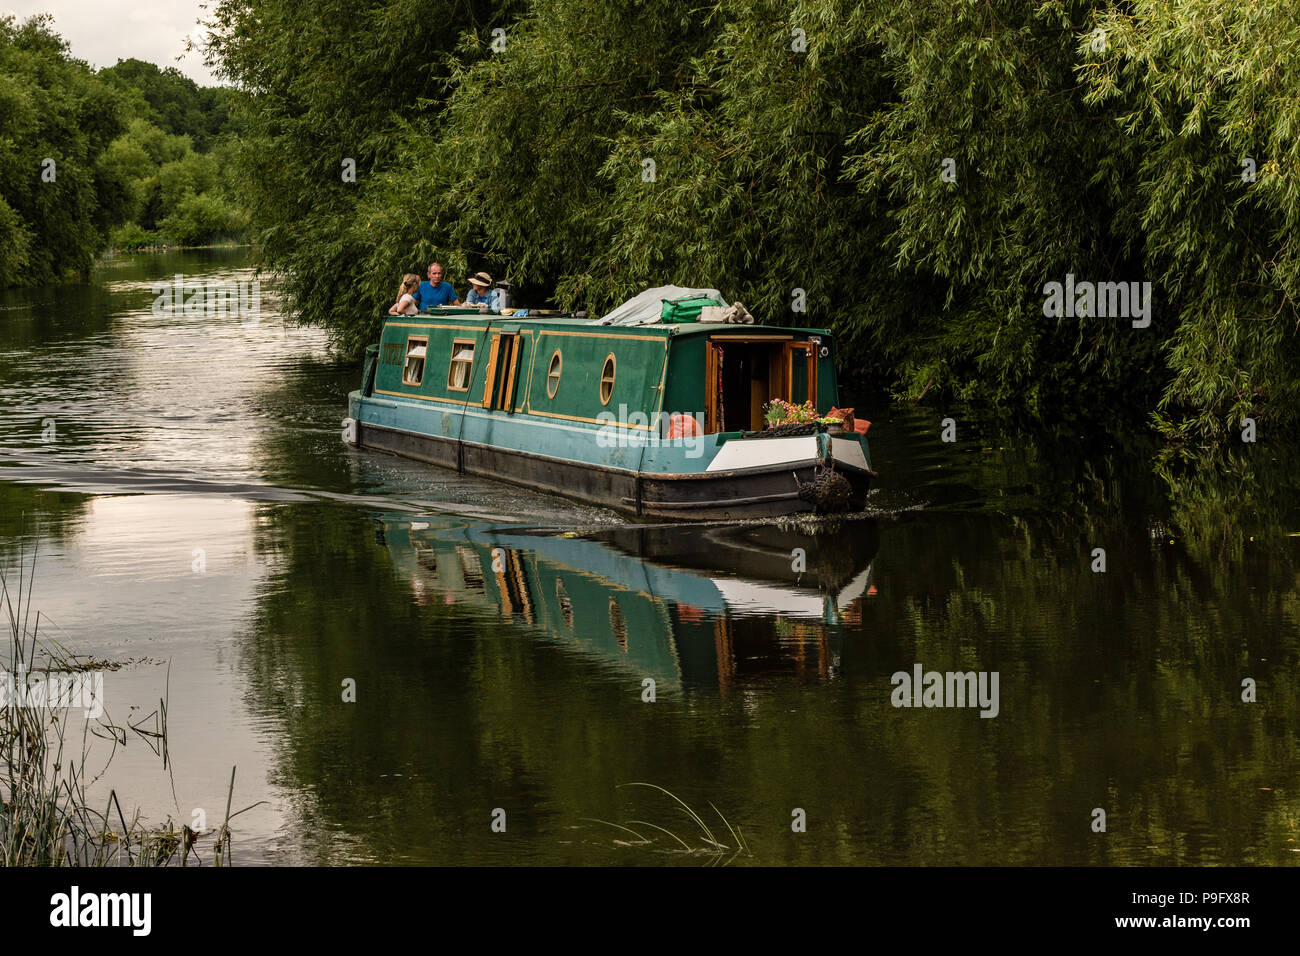 Canal boat on the river Avon at Stratford Upon Avon England. Stock Photo